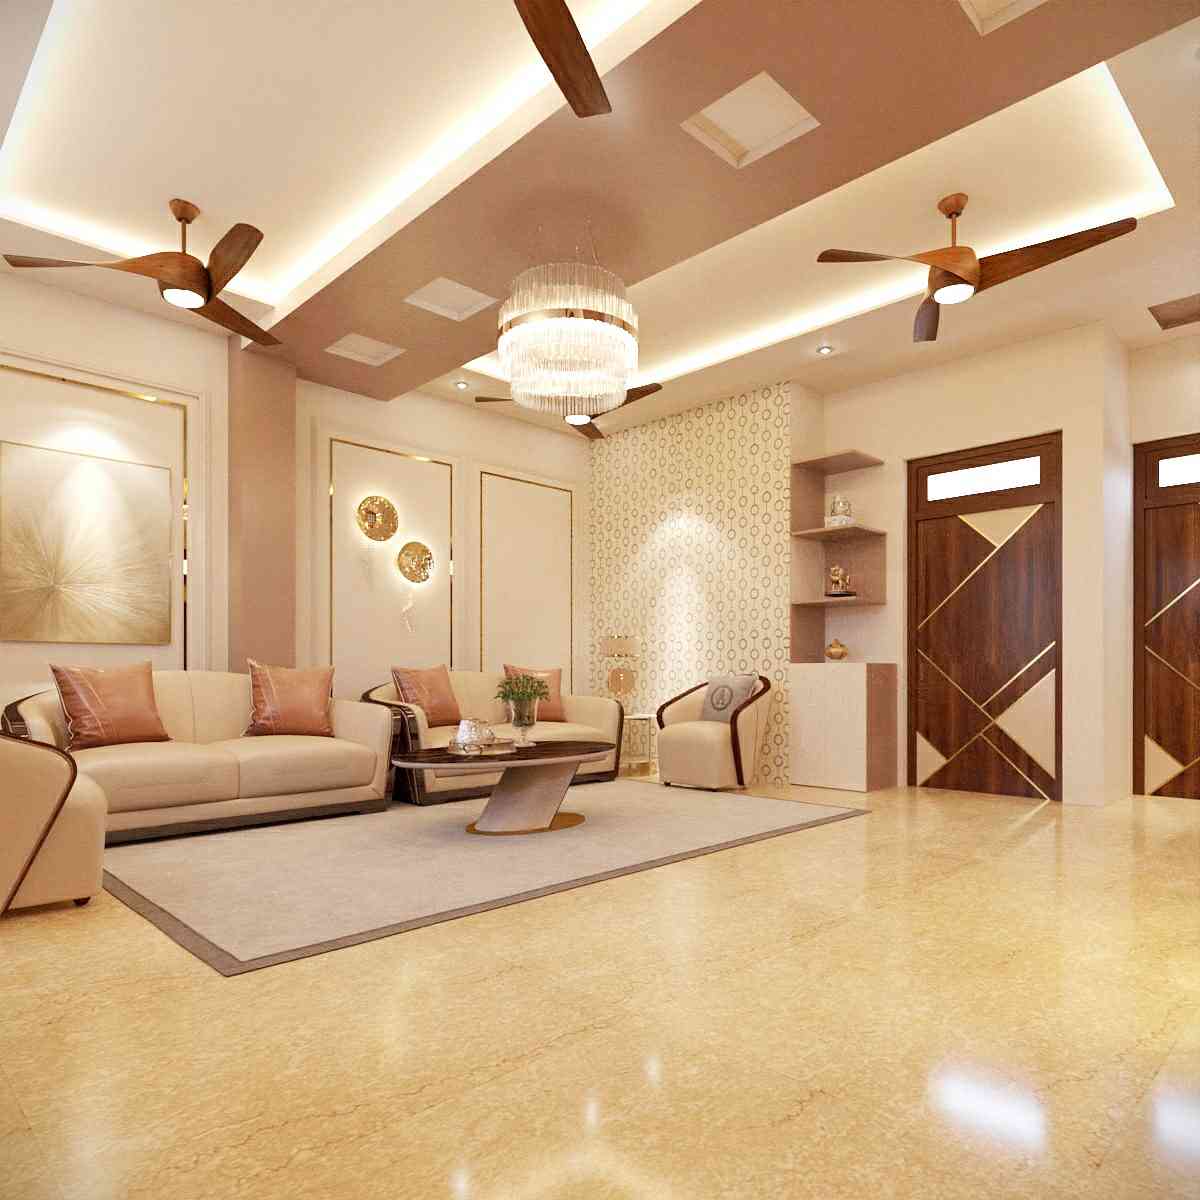 Contemporary Living Area Design With Wooden Furniture